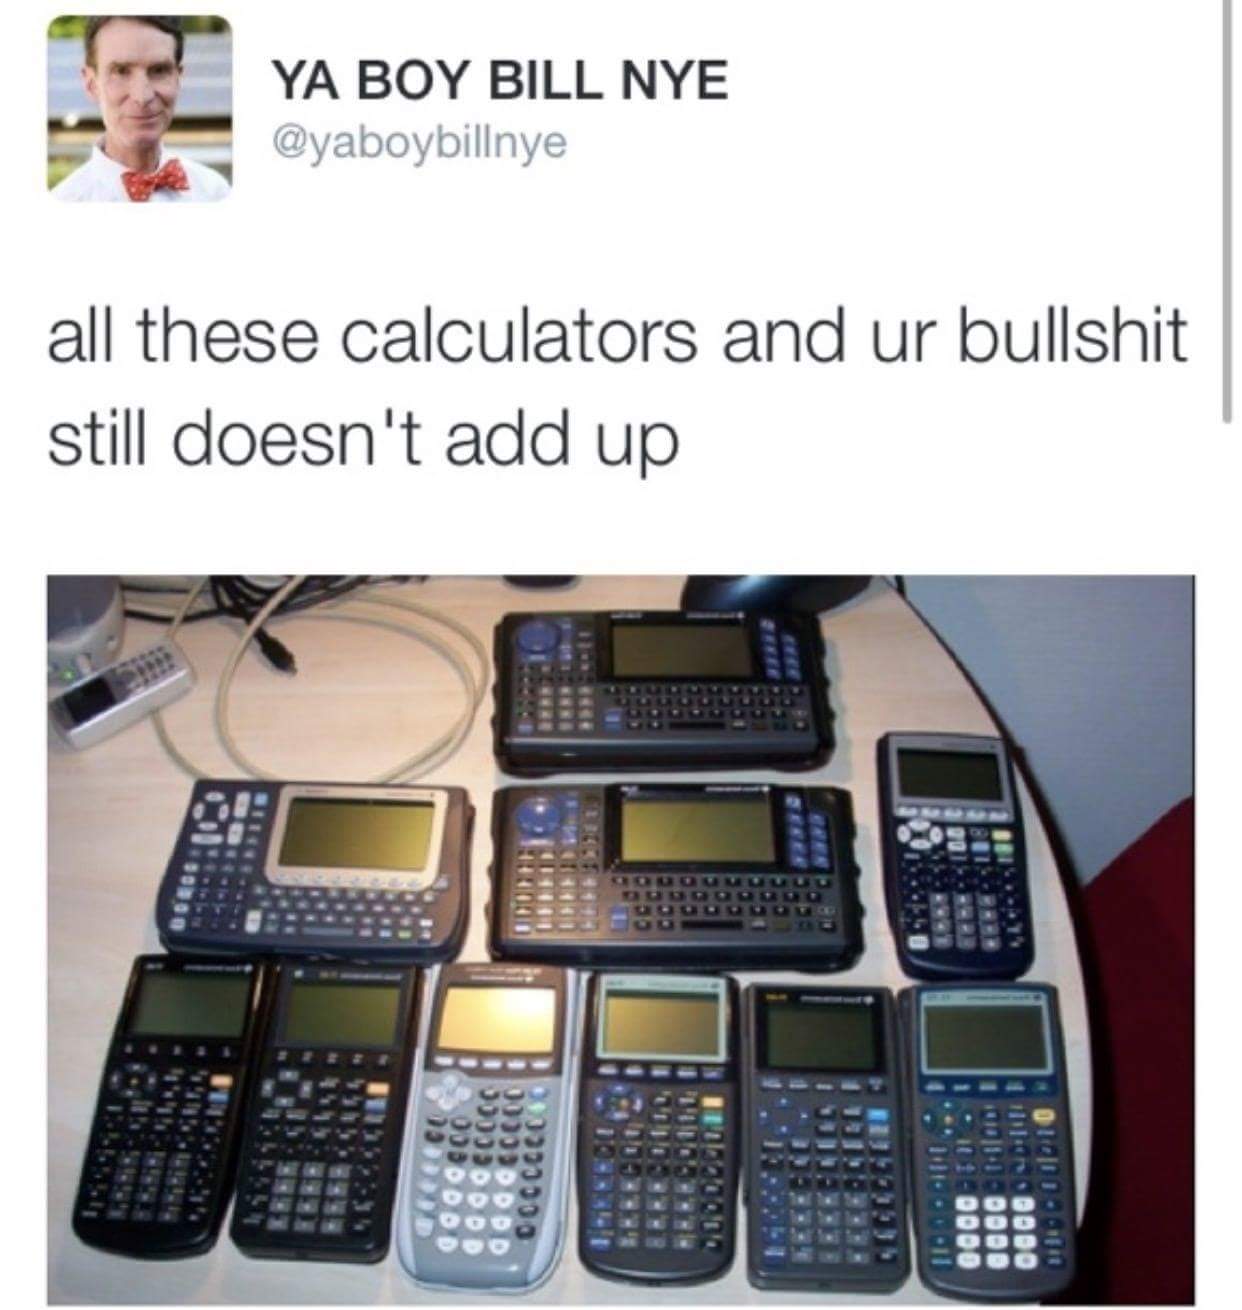 all these calculators and your bullshit still doesnt add up - Ya Boy Bill Nye all these calculators and ur bullshit still doesn't add up 10 00DDDD .. 11Oddo 000000 uit .ll